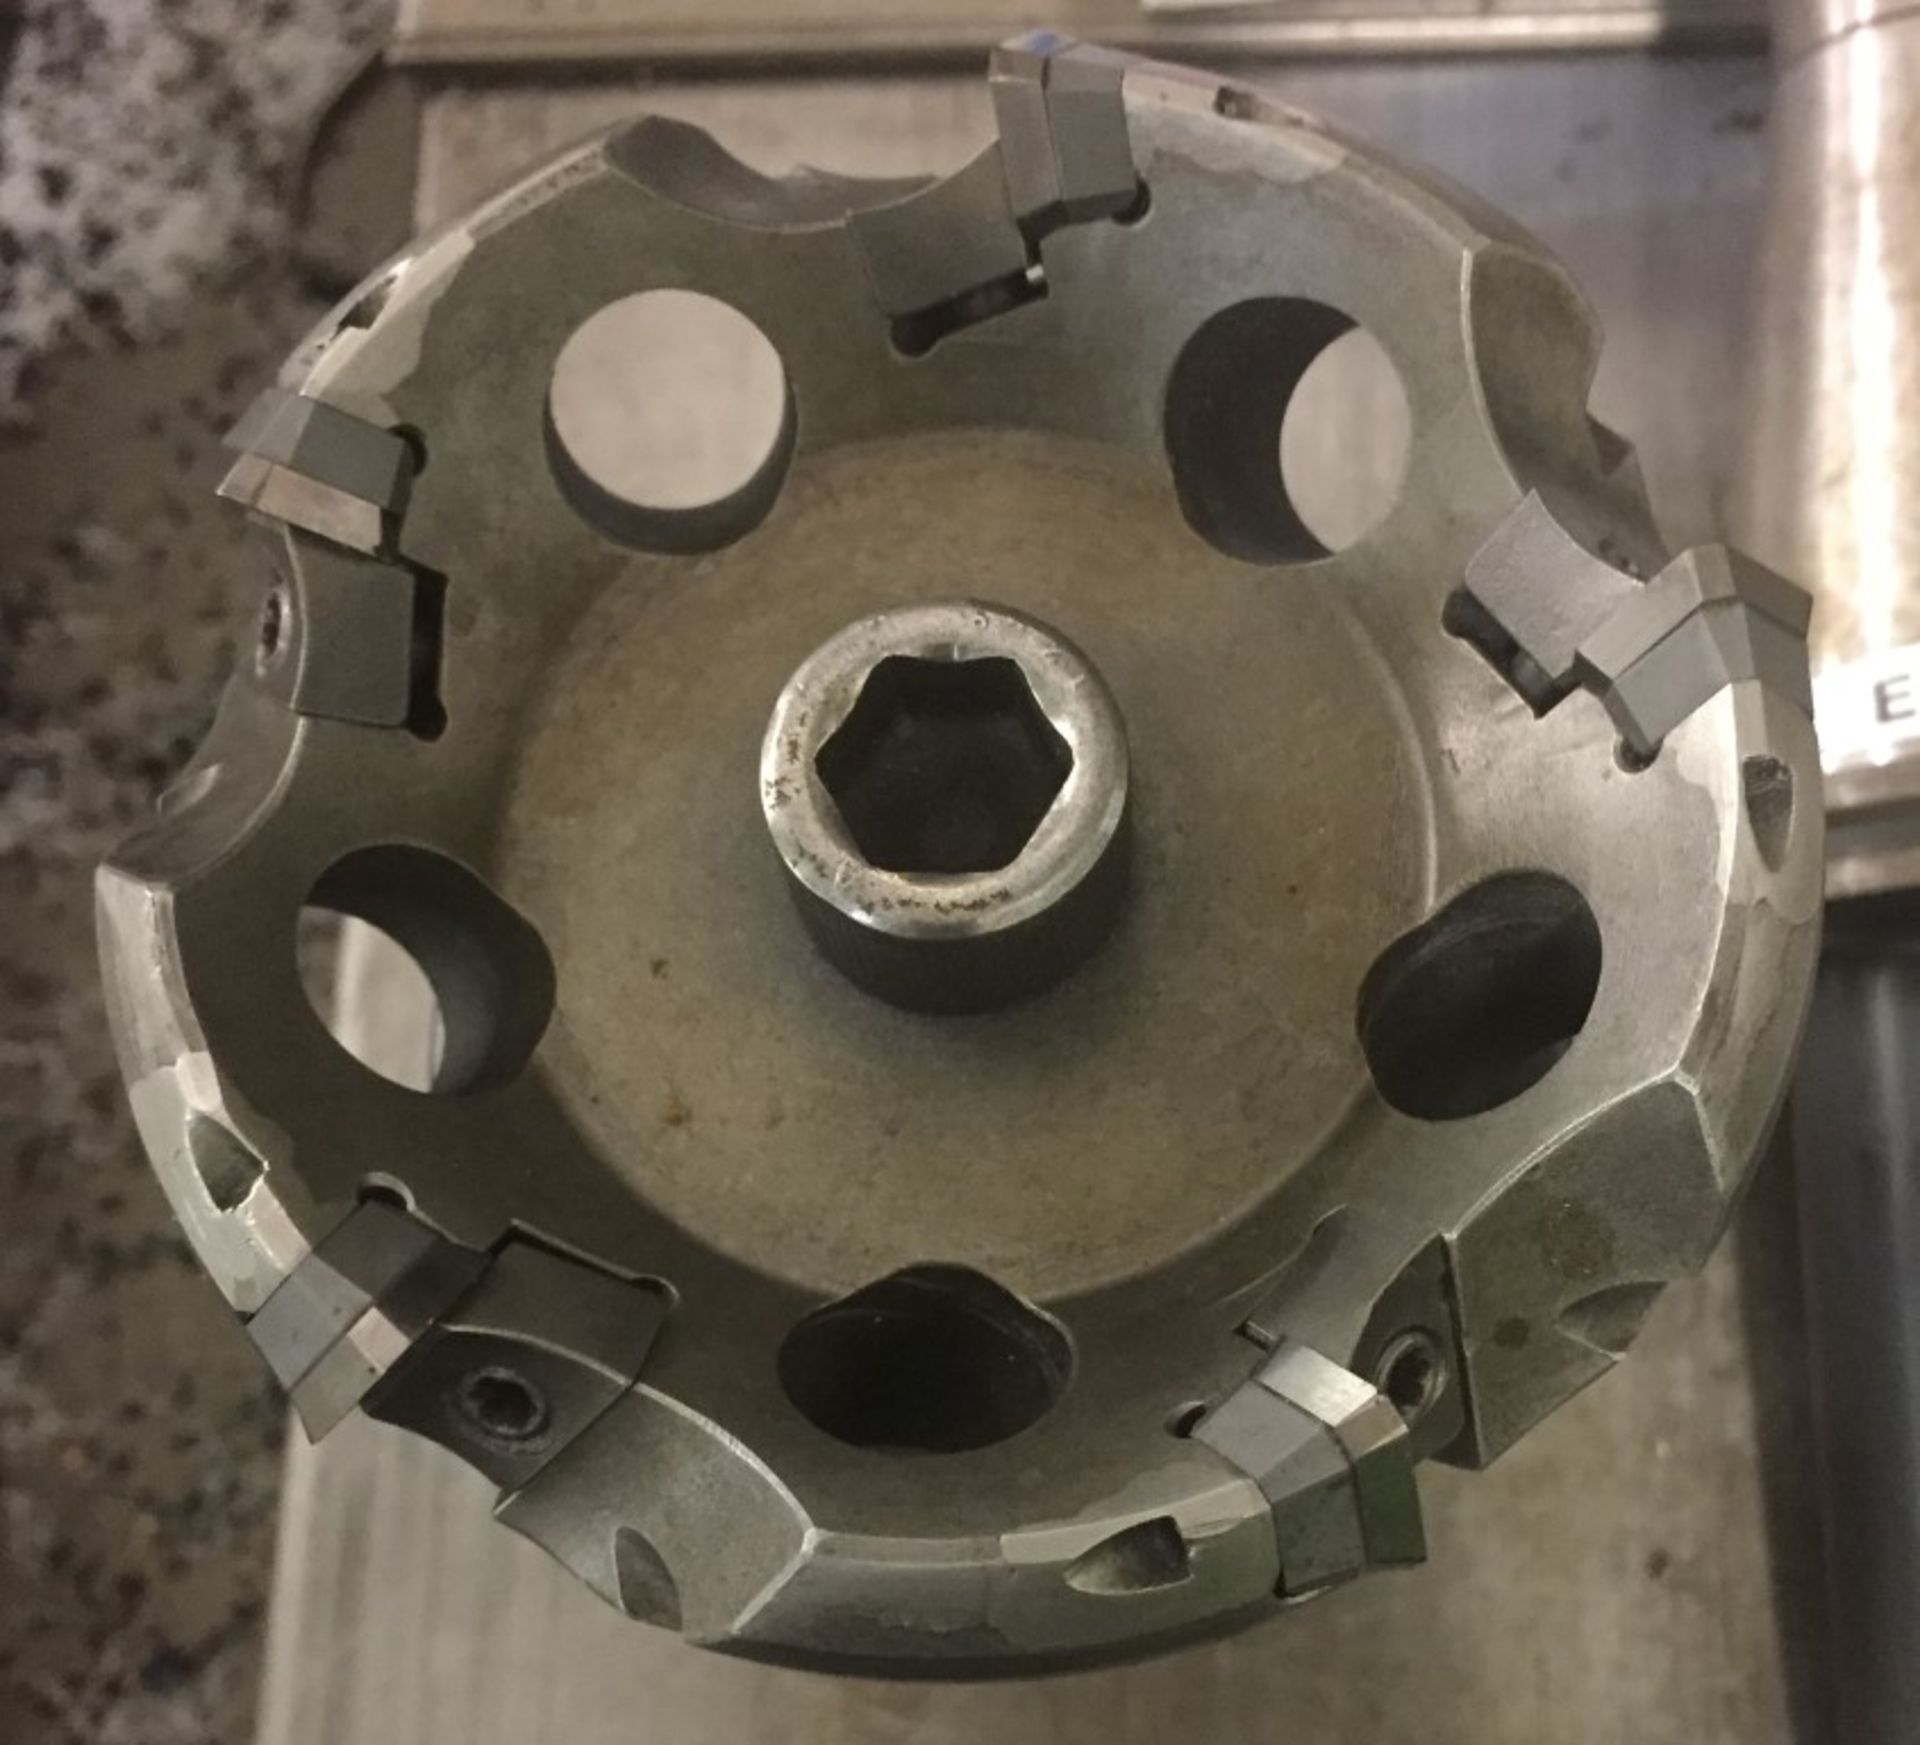 1 x CNC / VMC Mill Chuck and Mitsubishi LSE445-100A-05R 100mm Shell Face Mill Milling Cutter CNC (v) - Image 2 of 5